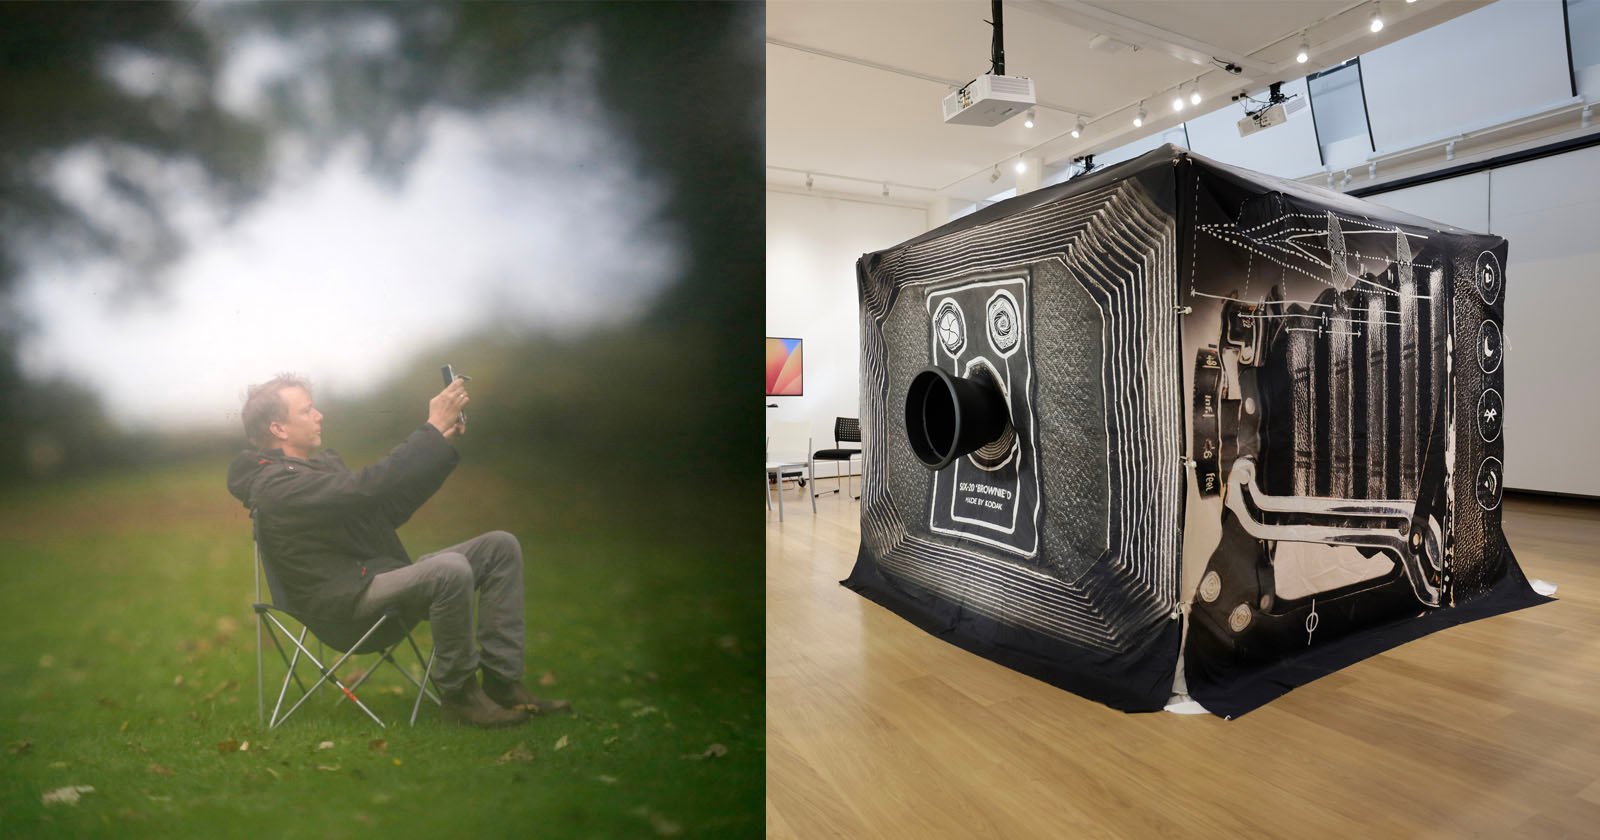 The Worlds First Camera Obscura That You Can Take Selfies With